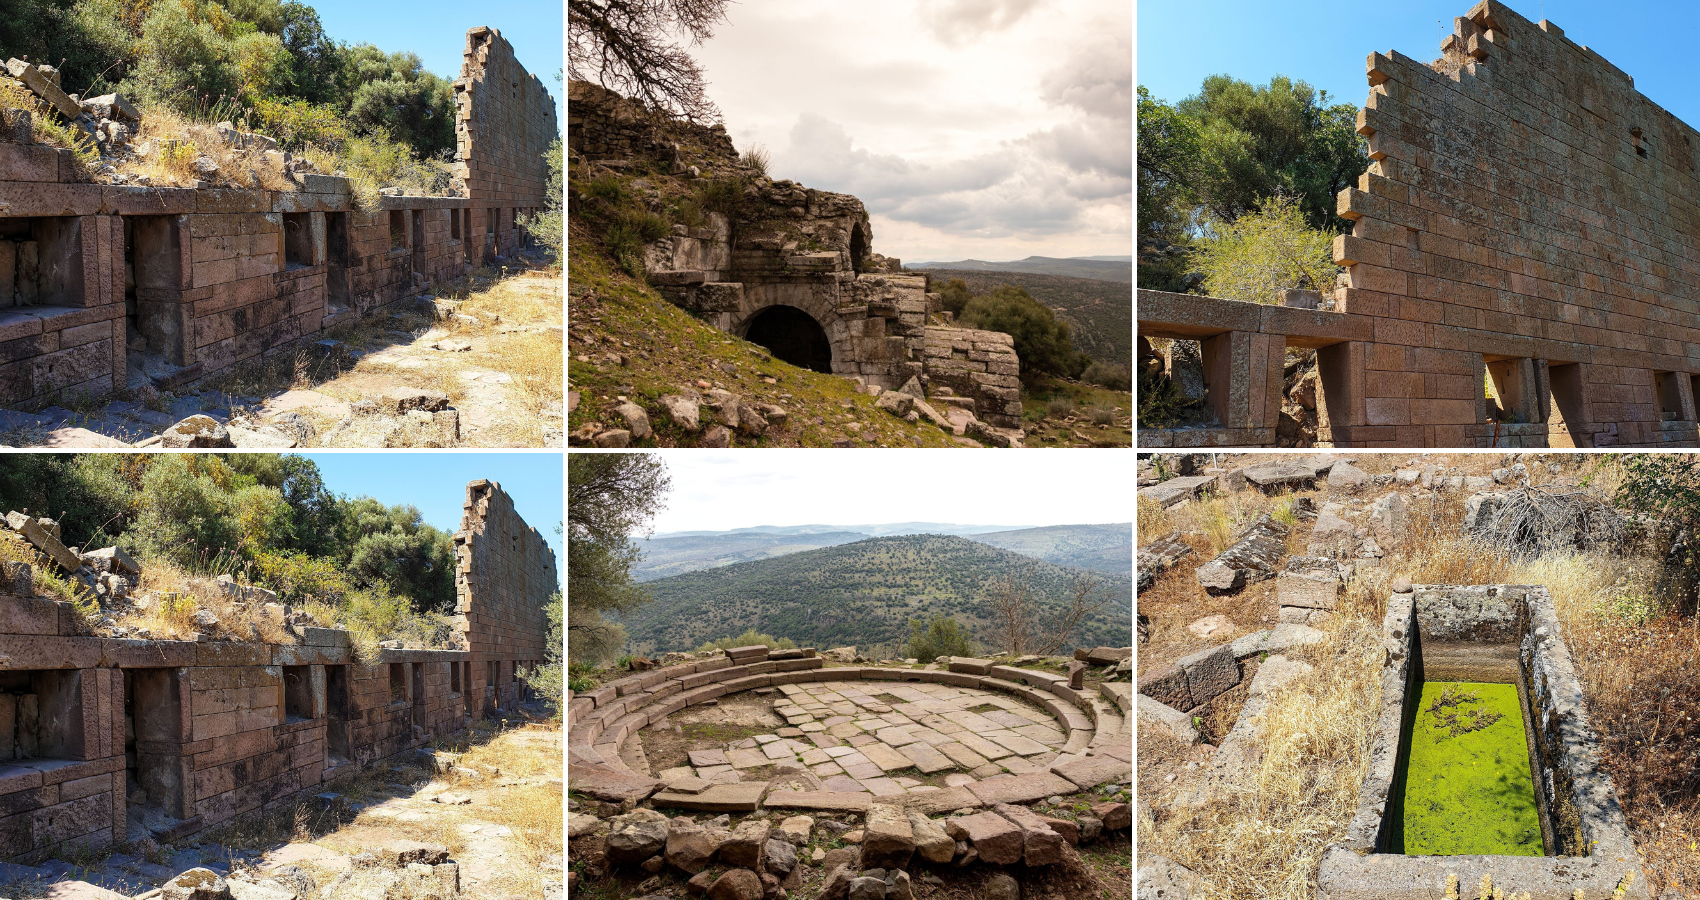 Discovering Aigai, Aeolians’ ‘city of goats’ in western Turkey